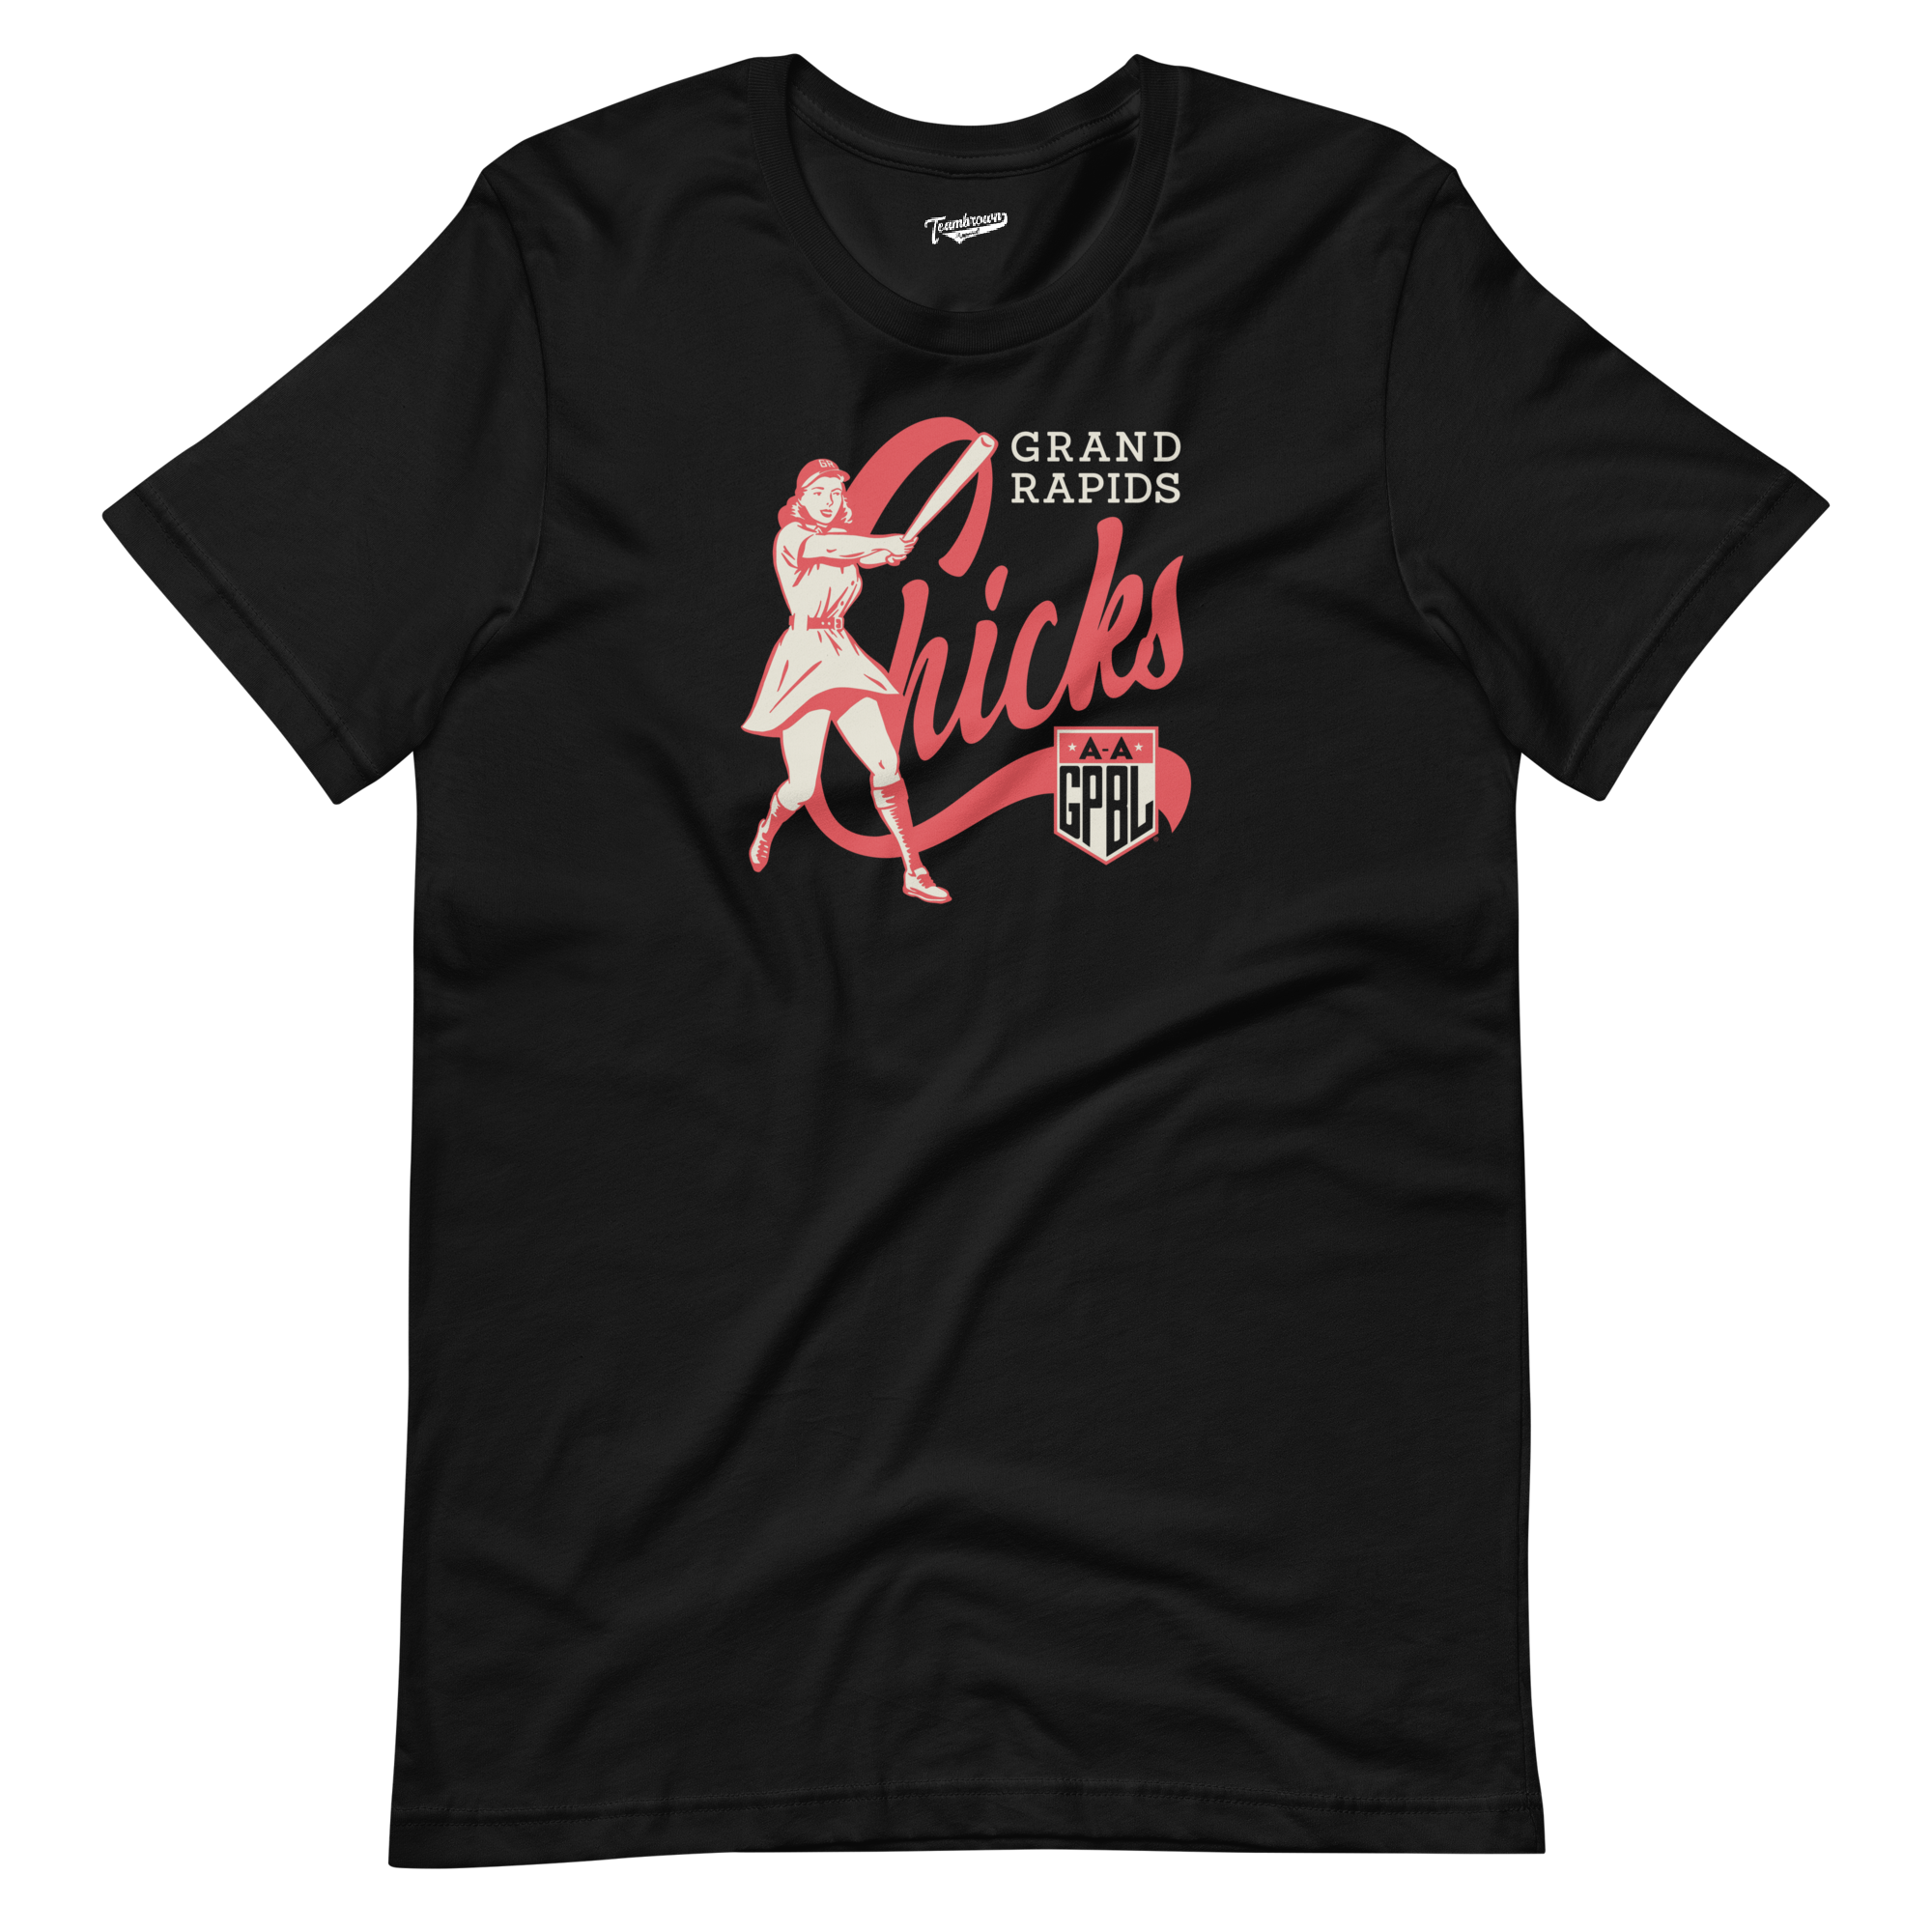 Diamond - Grand Rapids Chicks - Unisex T-Shirt | Officially Licensed - AAGPBL